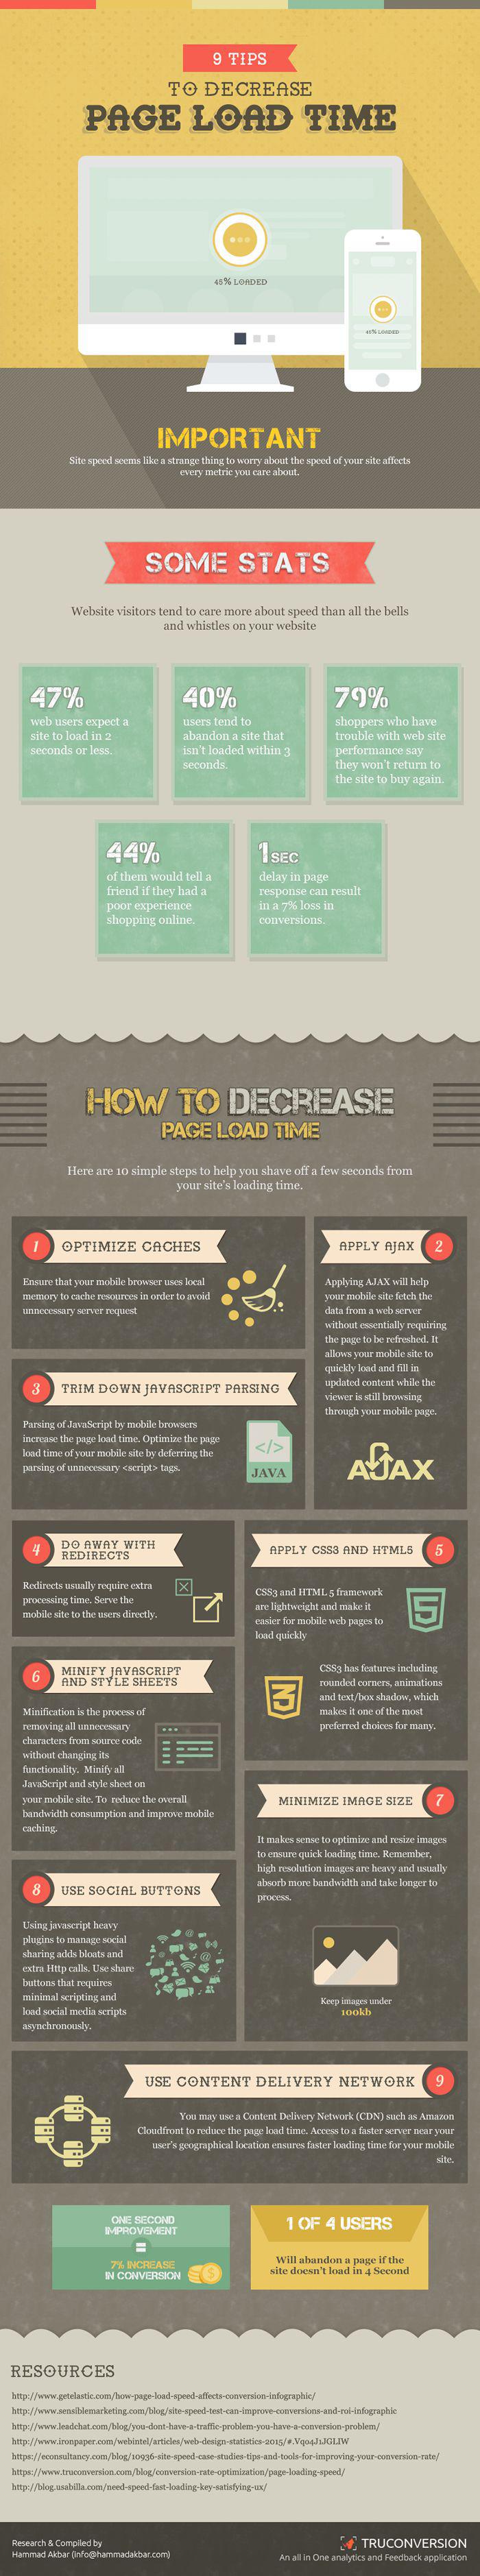 How To Decrease Your Website Page Load Speed Time